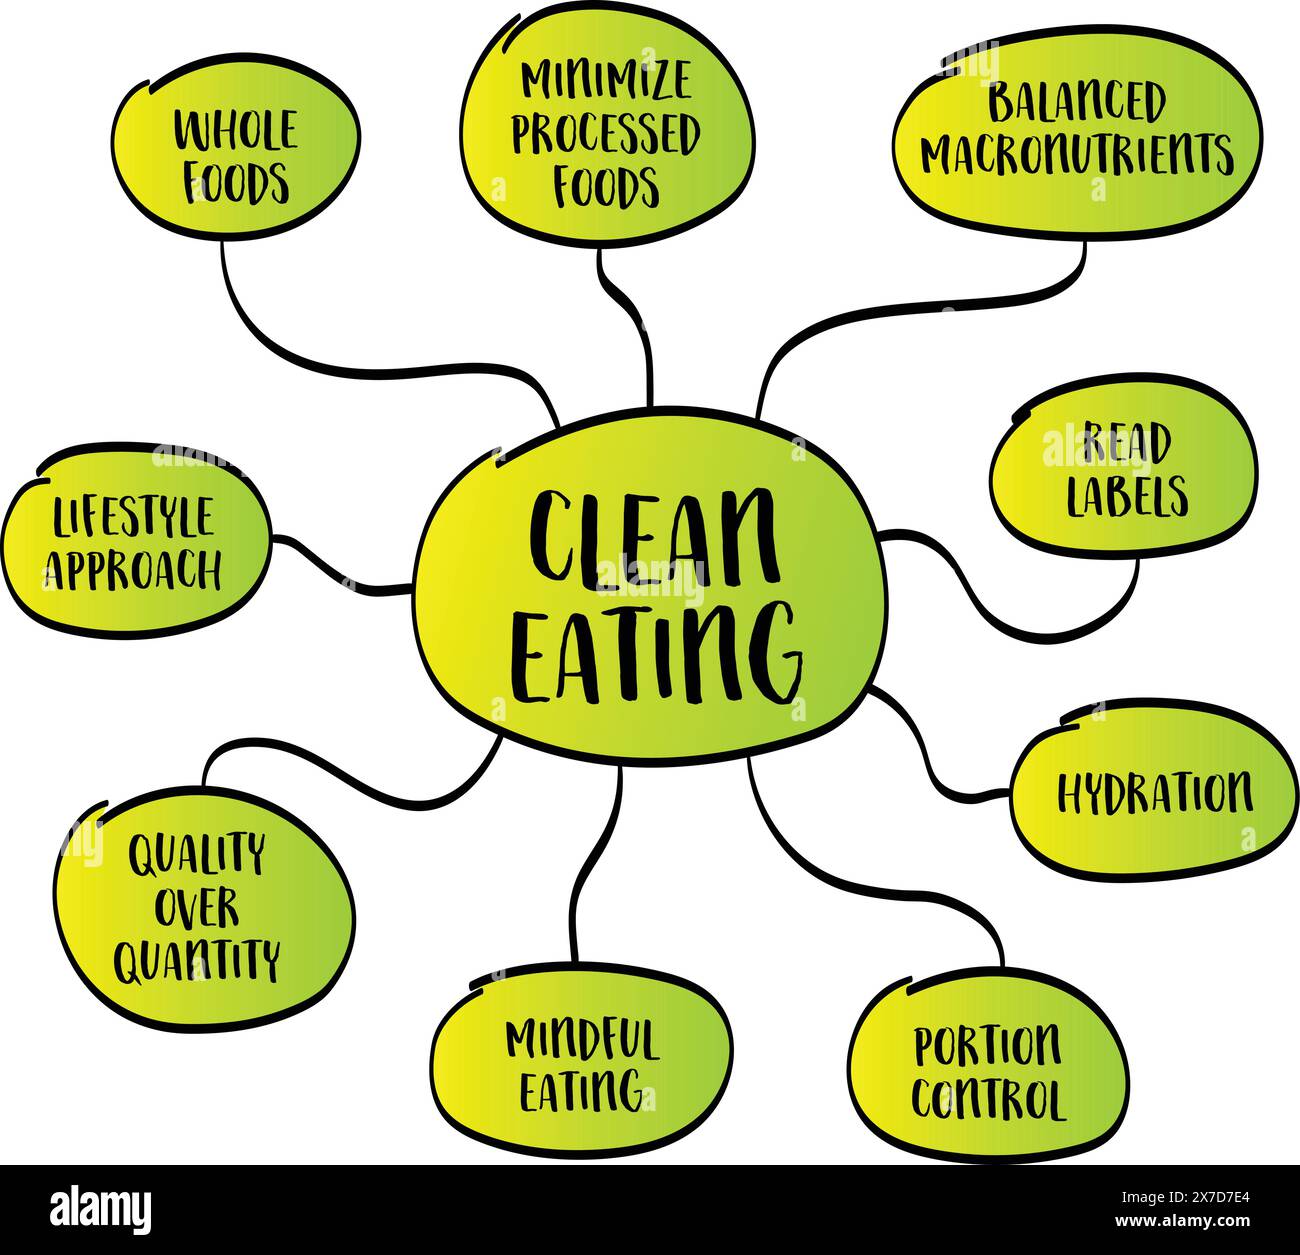 Clean eating, a dietary approach focused on consuming whole, unprocessed foods while minimizing or avoiding processed and refined foods, vector mind m Stock Vector